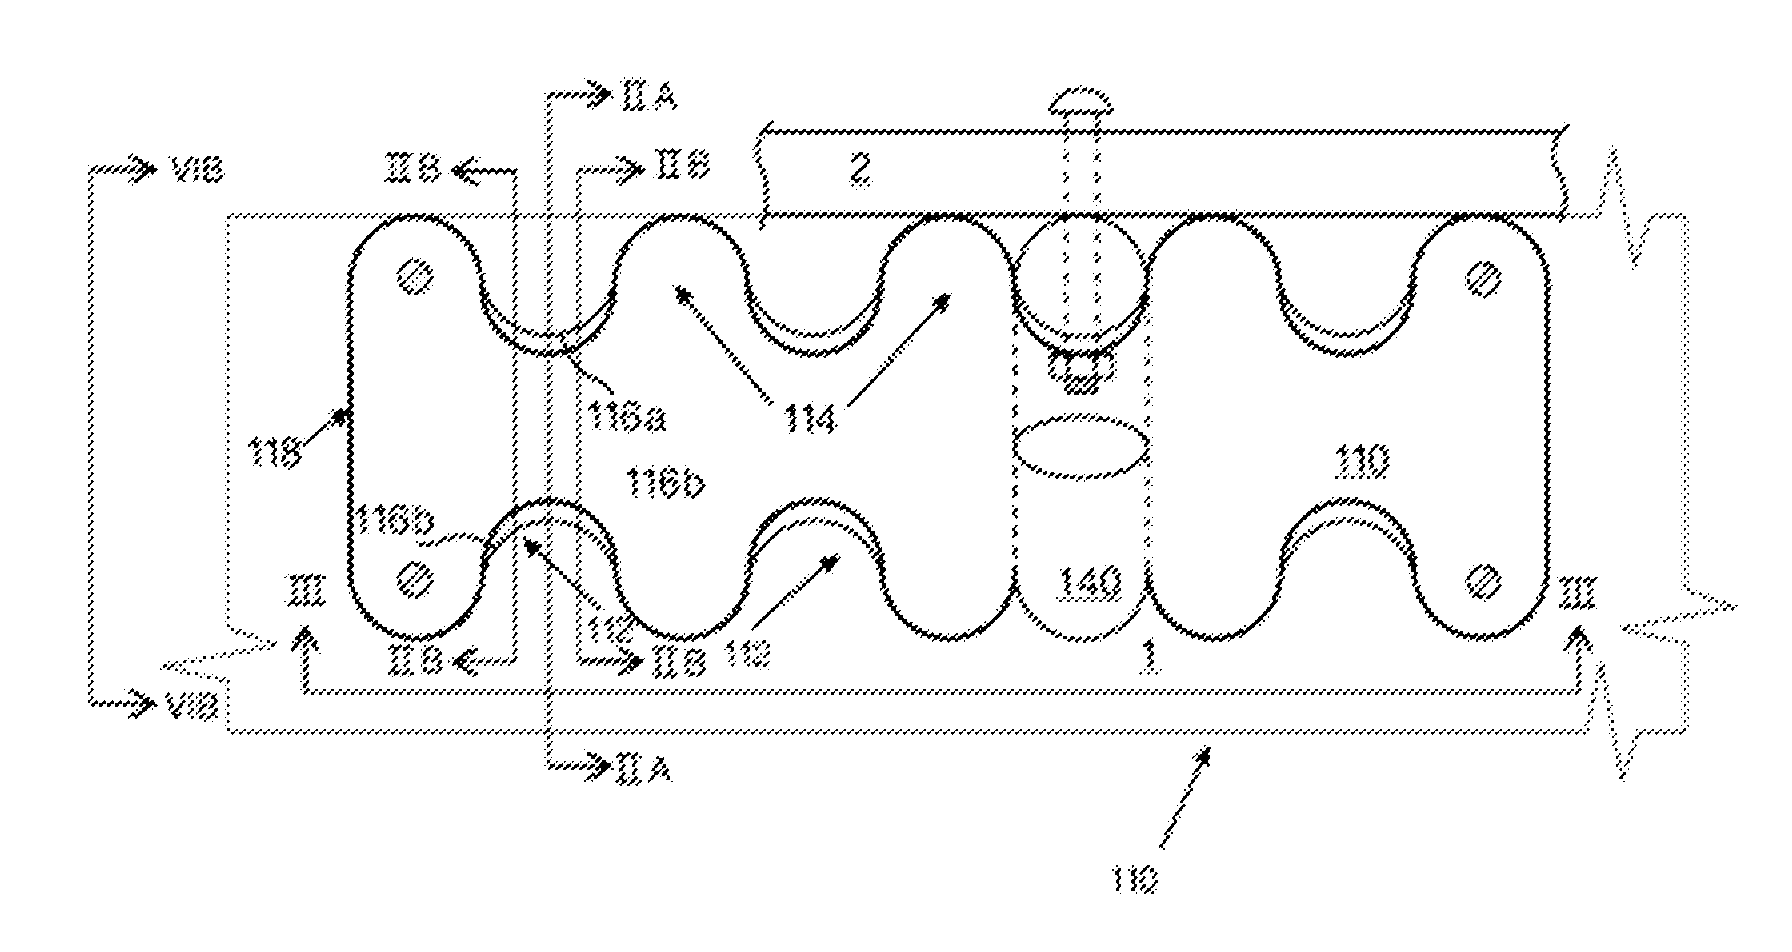 Pinless attachment systems and methods of using the same